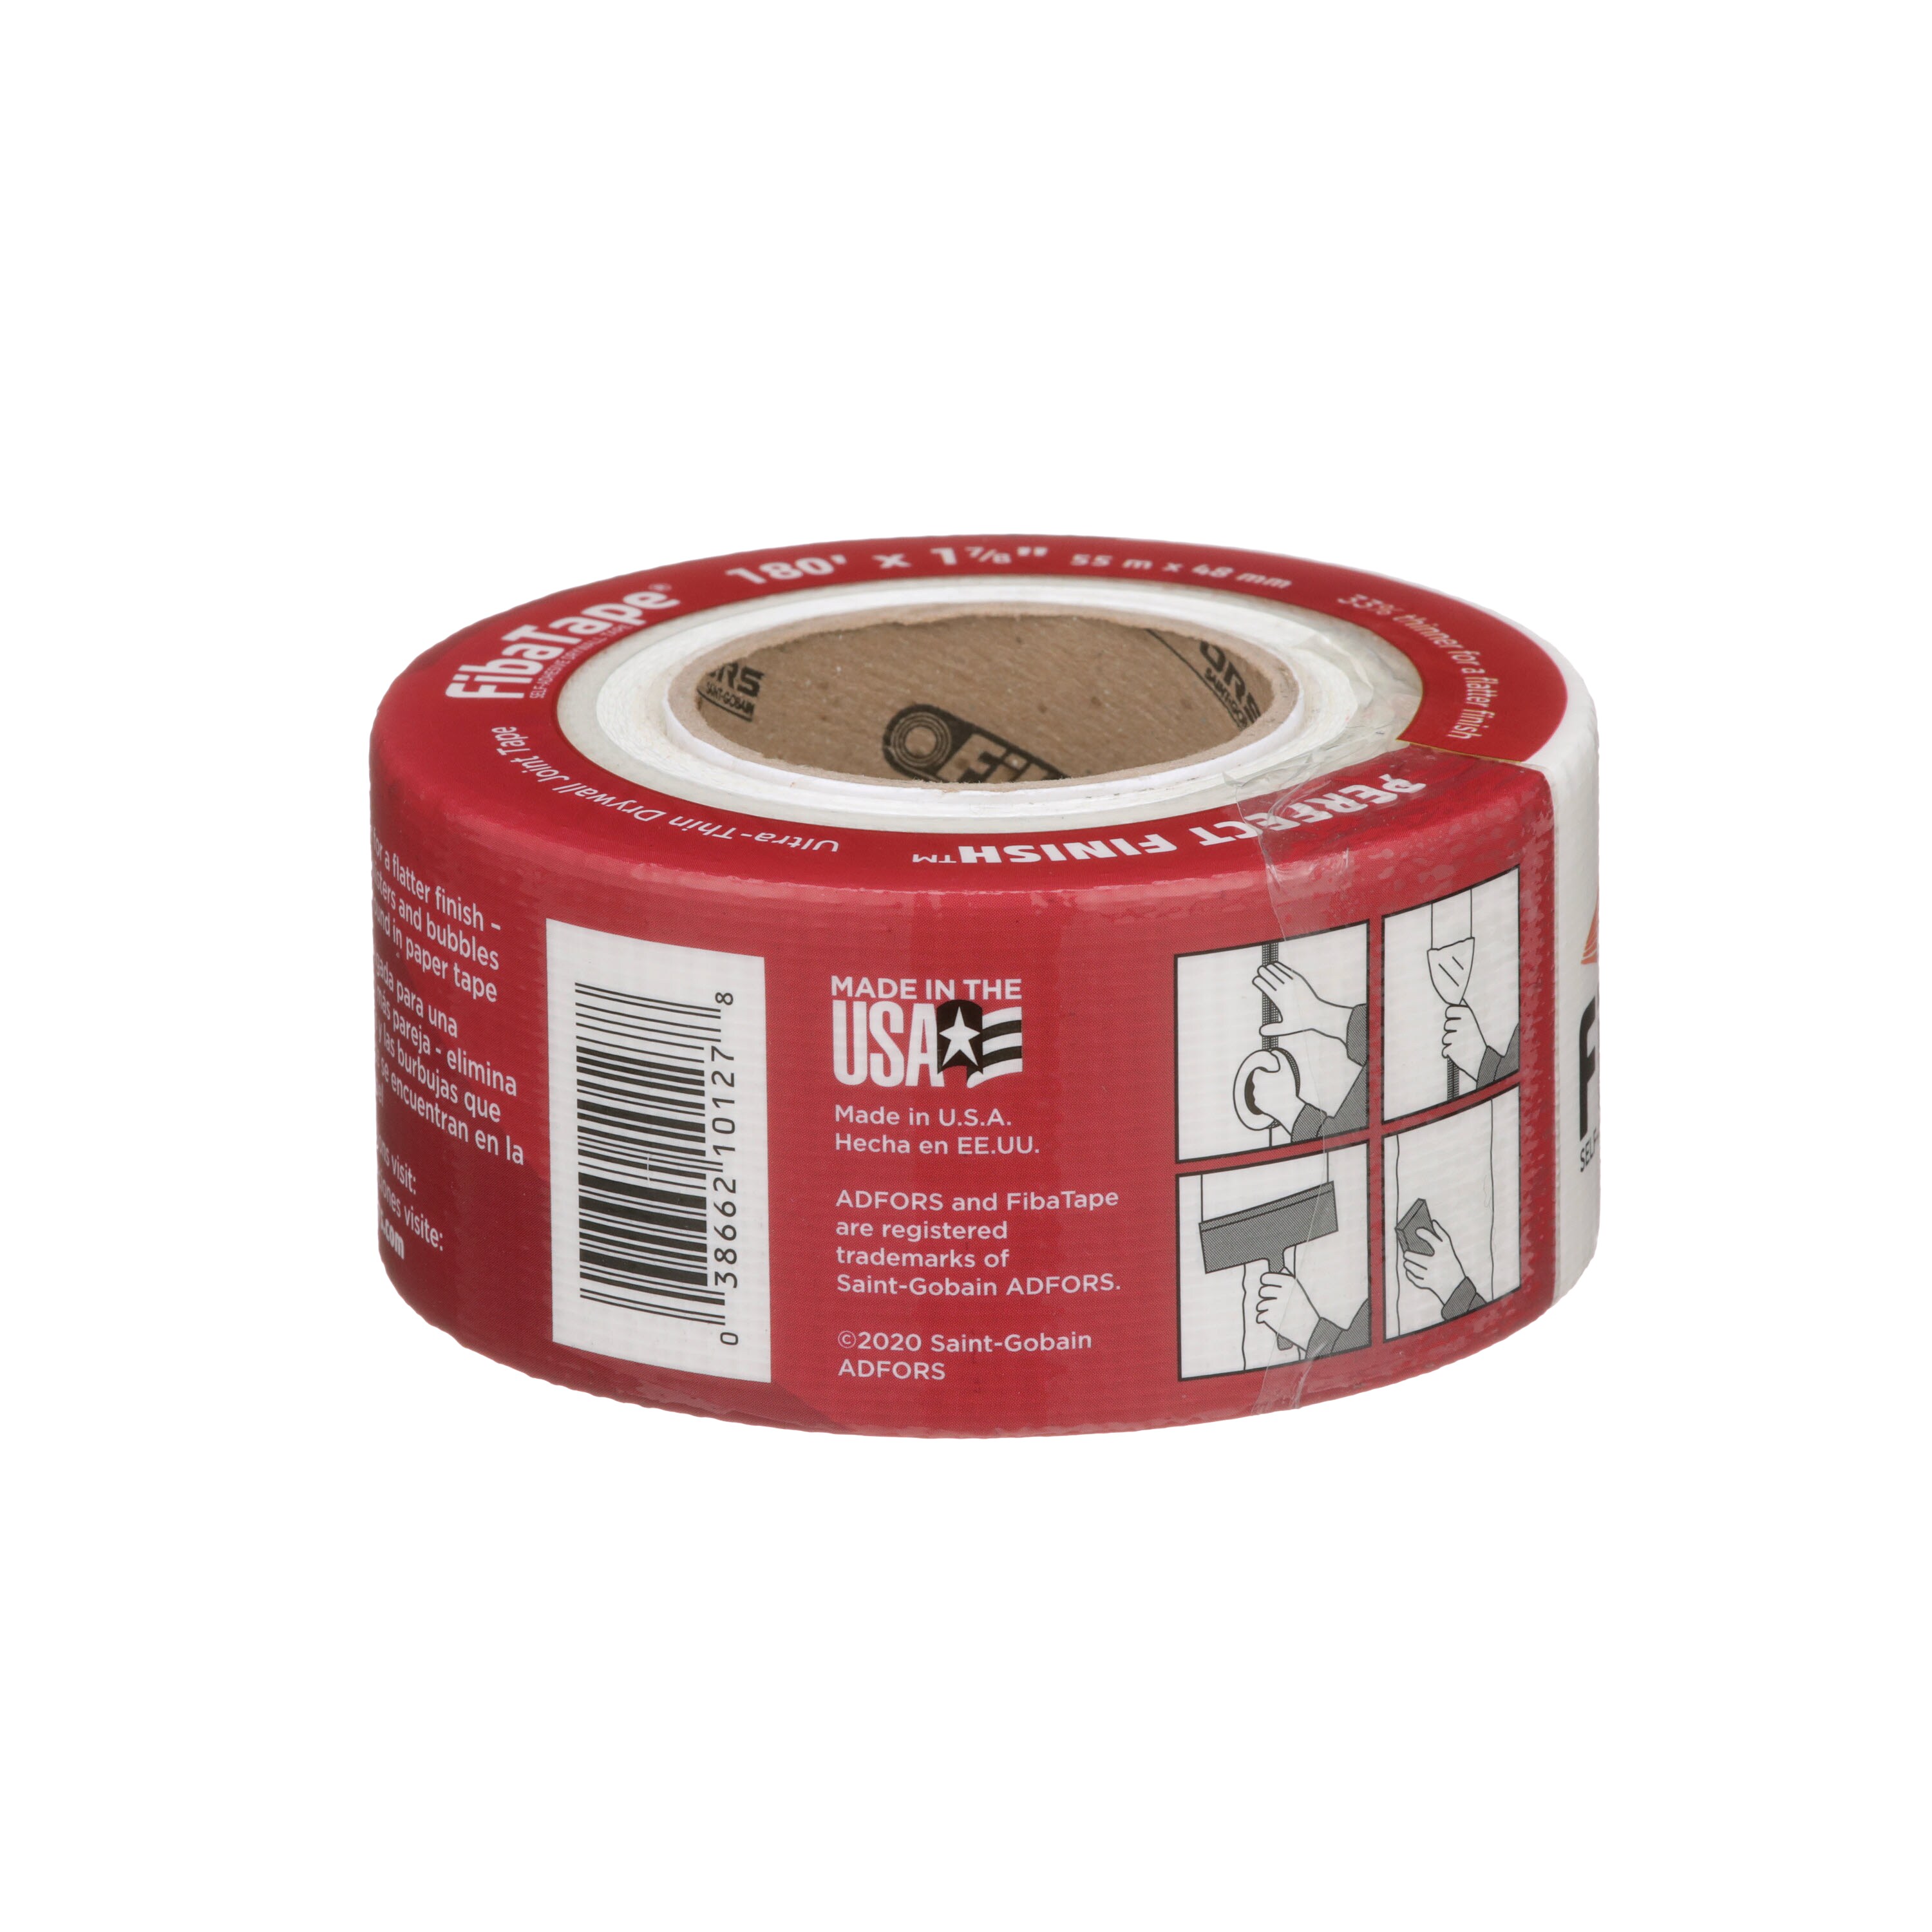 Champion 1 x 36 yds Sports Floor Tape, Red